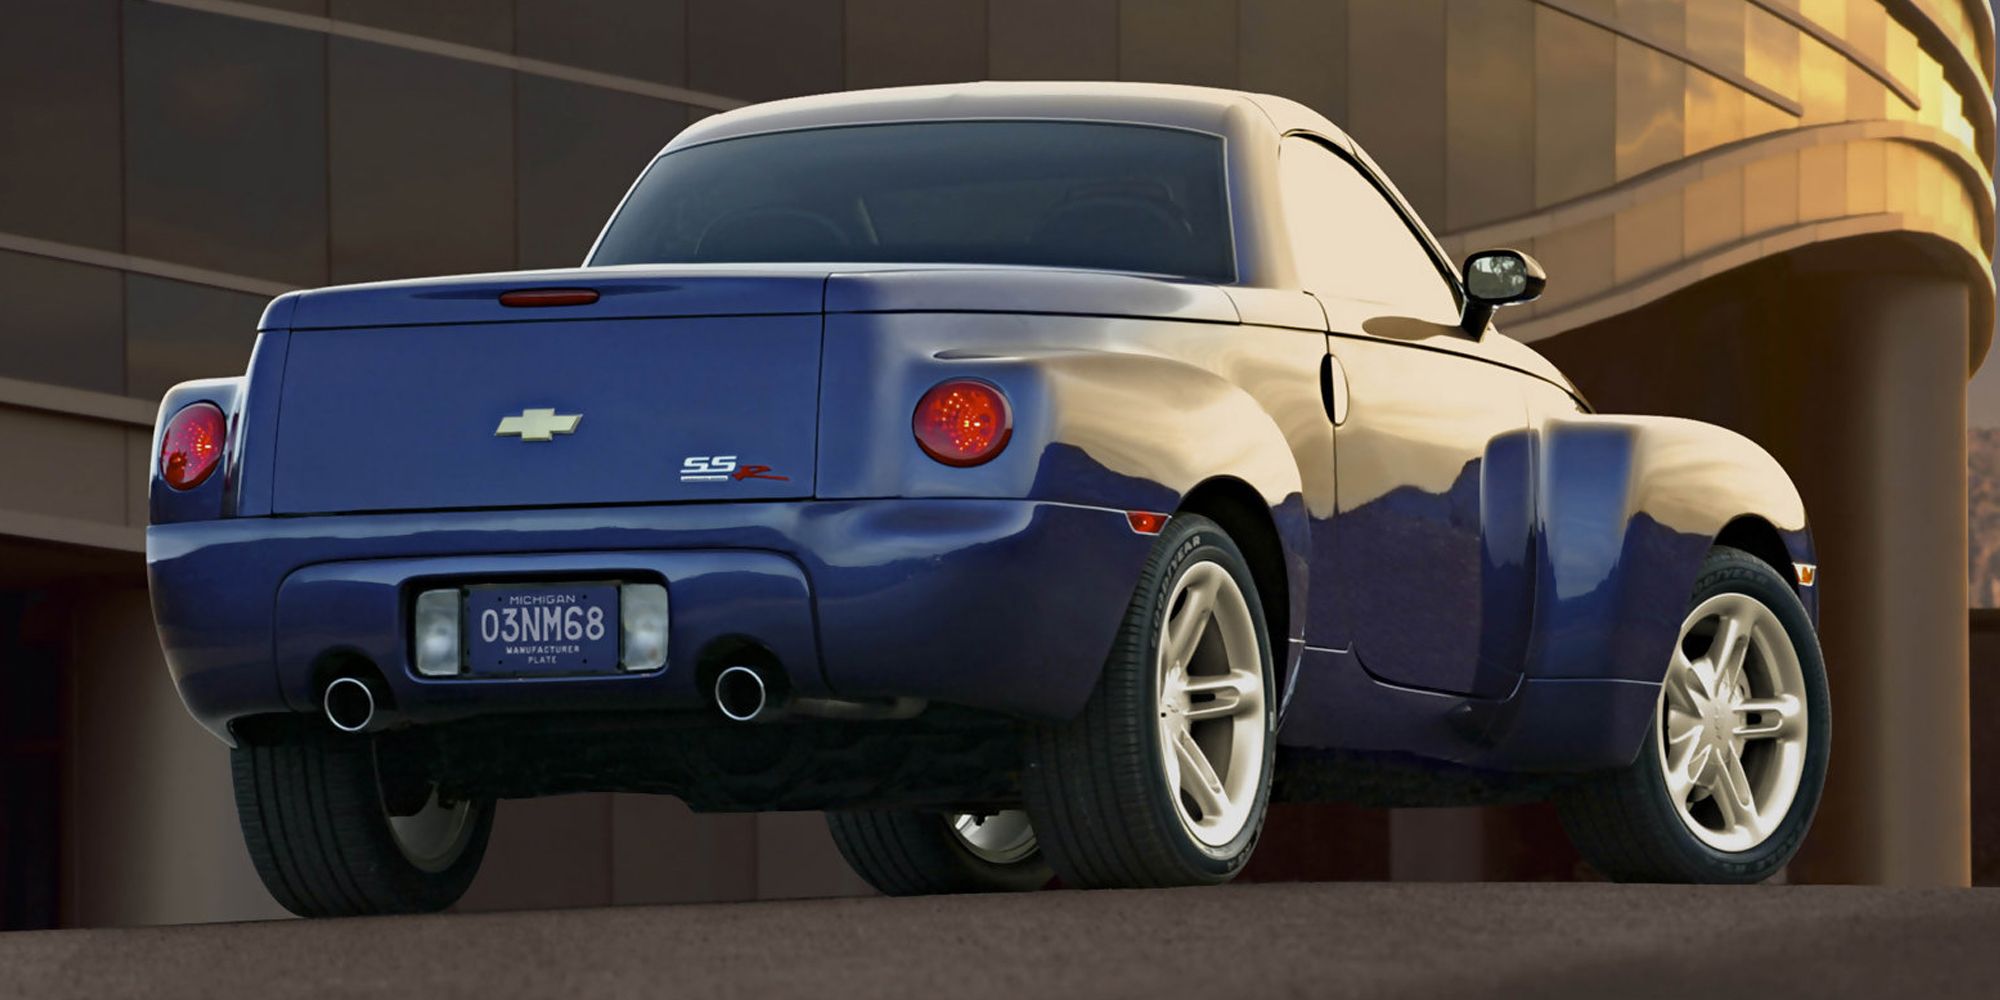 The rear of the SSR in blue